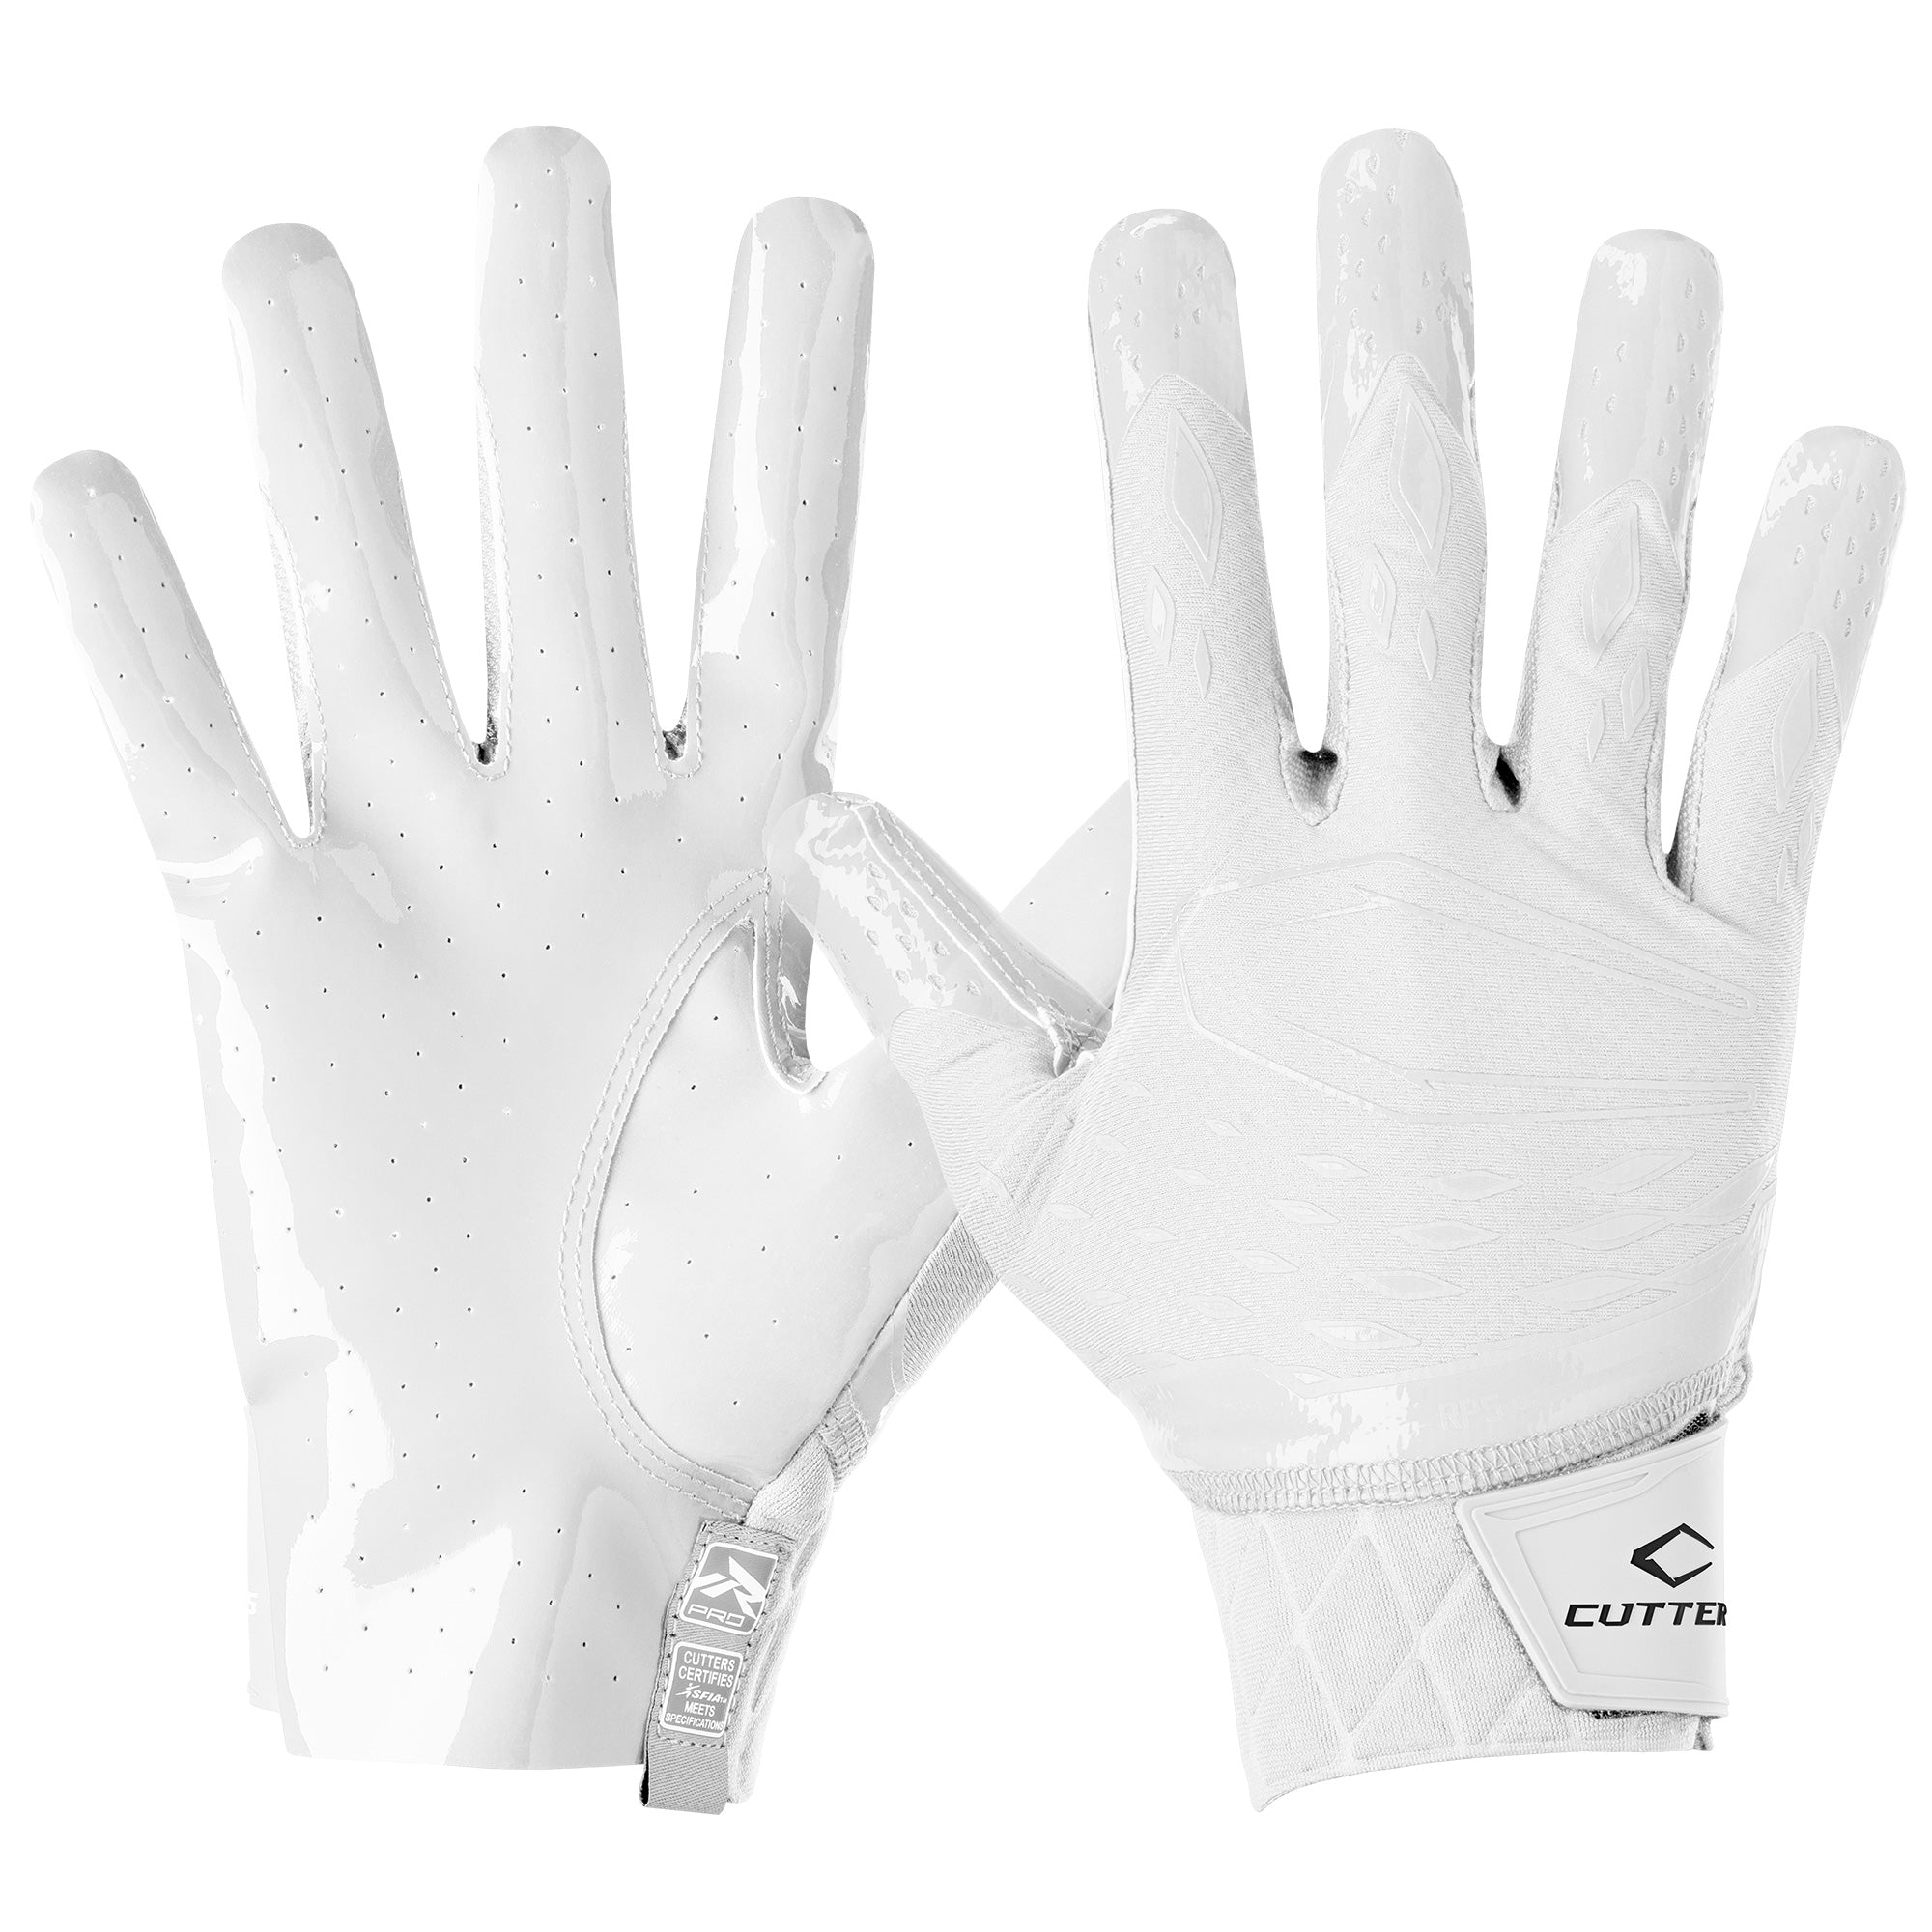 Cutters Men's Rev Pro 5.0 Receiver Gloves Accessories United Sports Brands Small White 